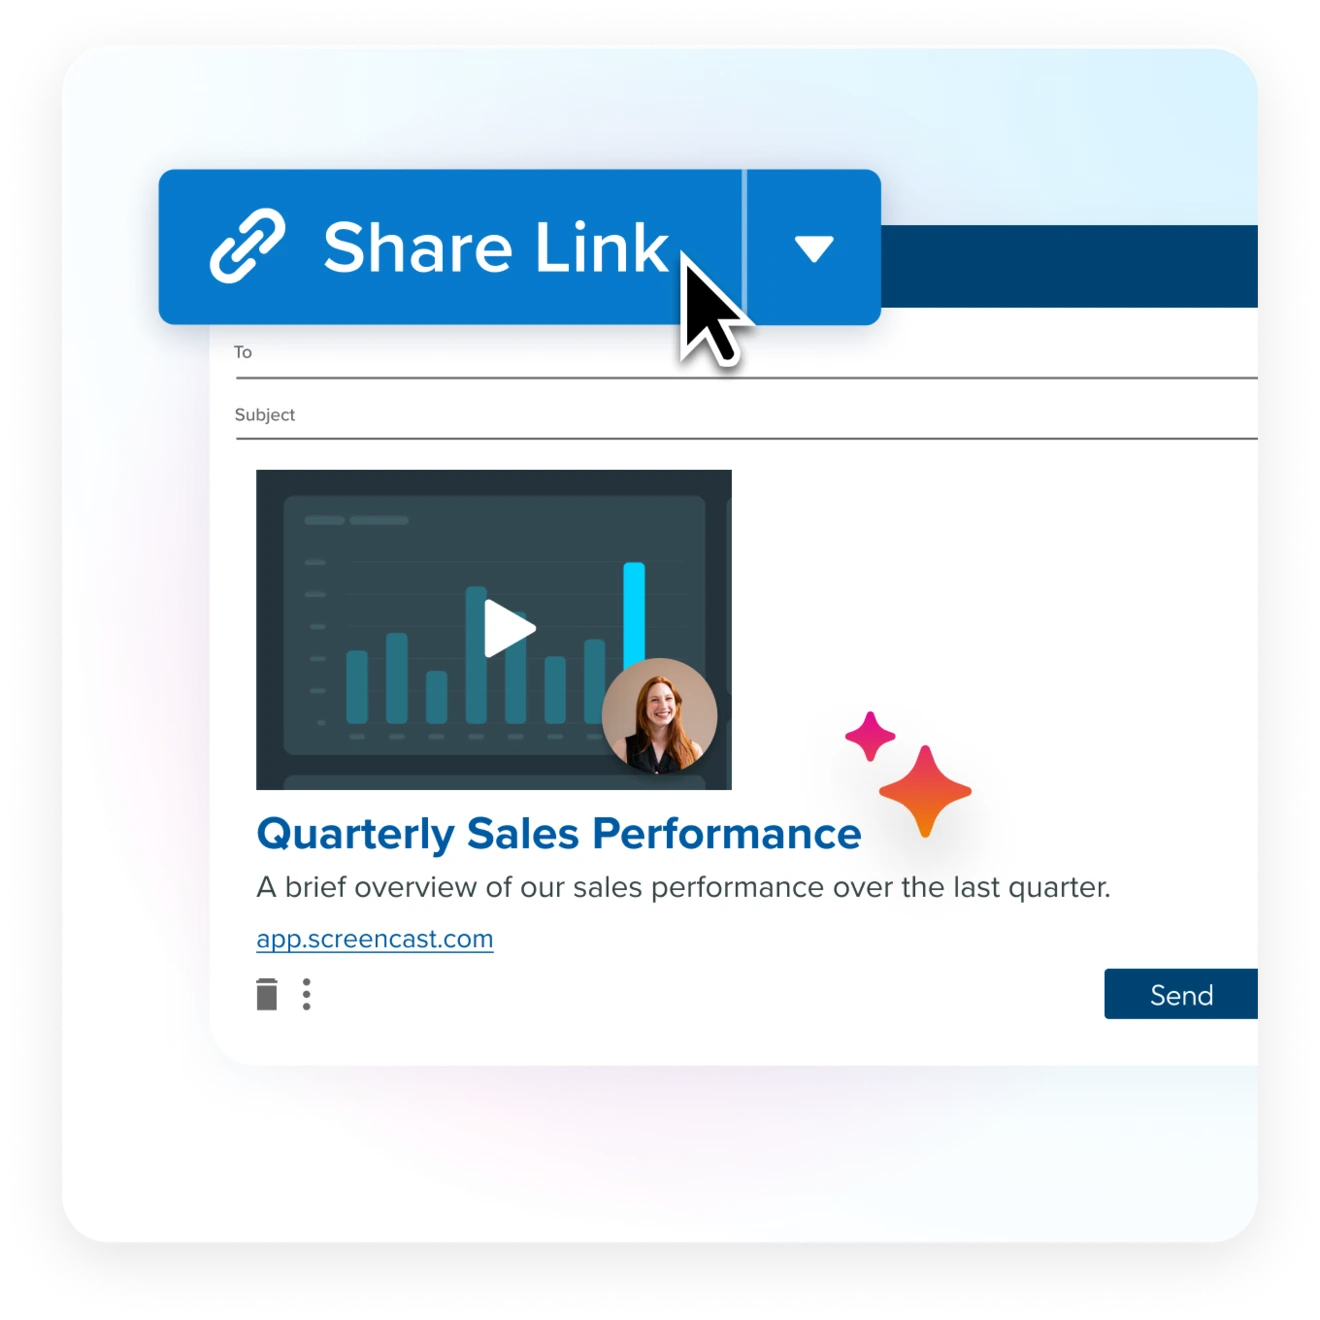 A link, instantly copied to your clipboard, lets you quickly share video messages with team members, stakeholders, clients, or anyone else.